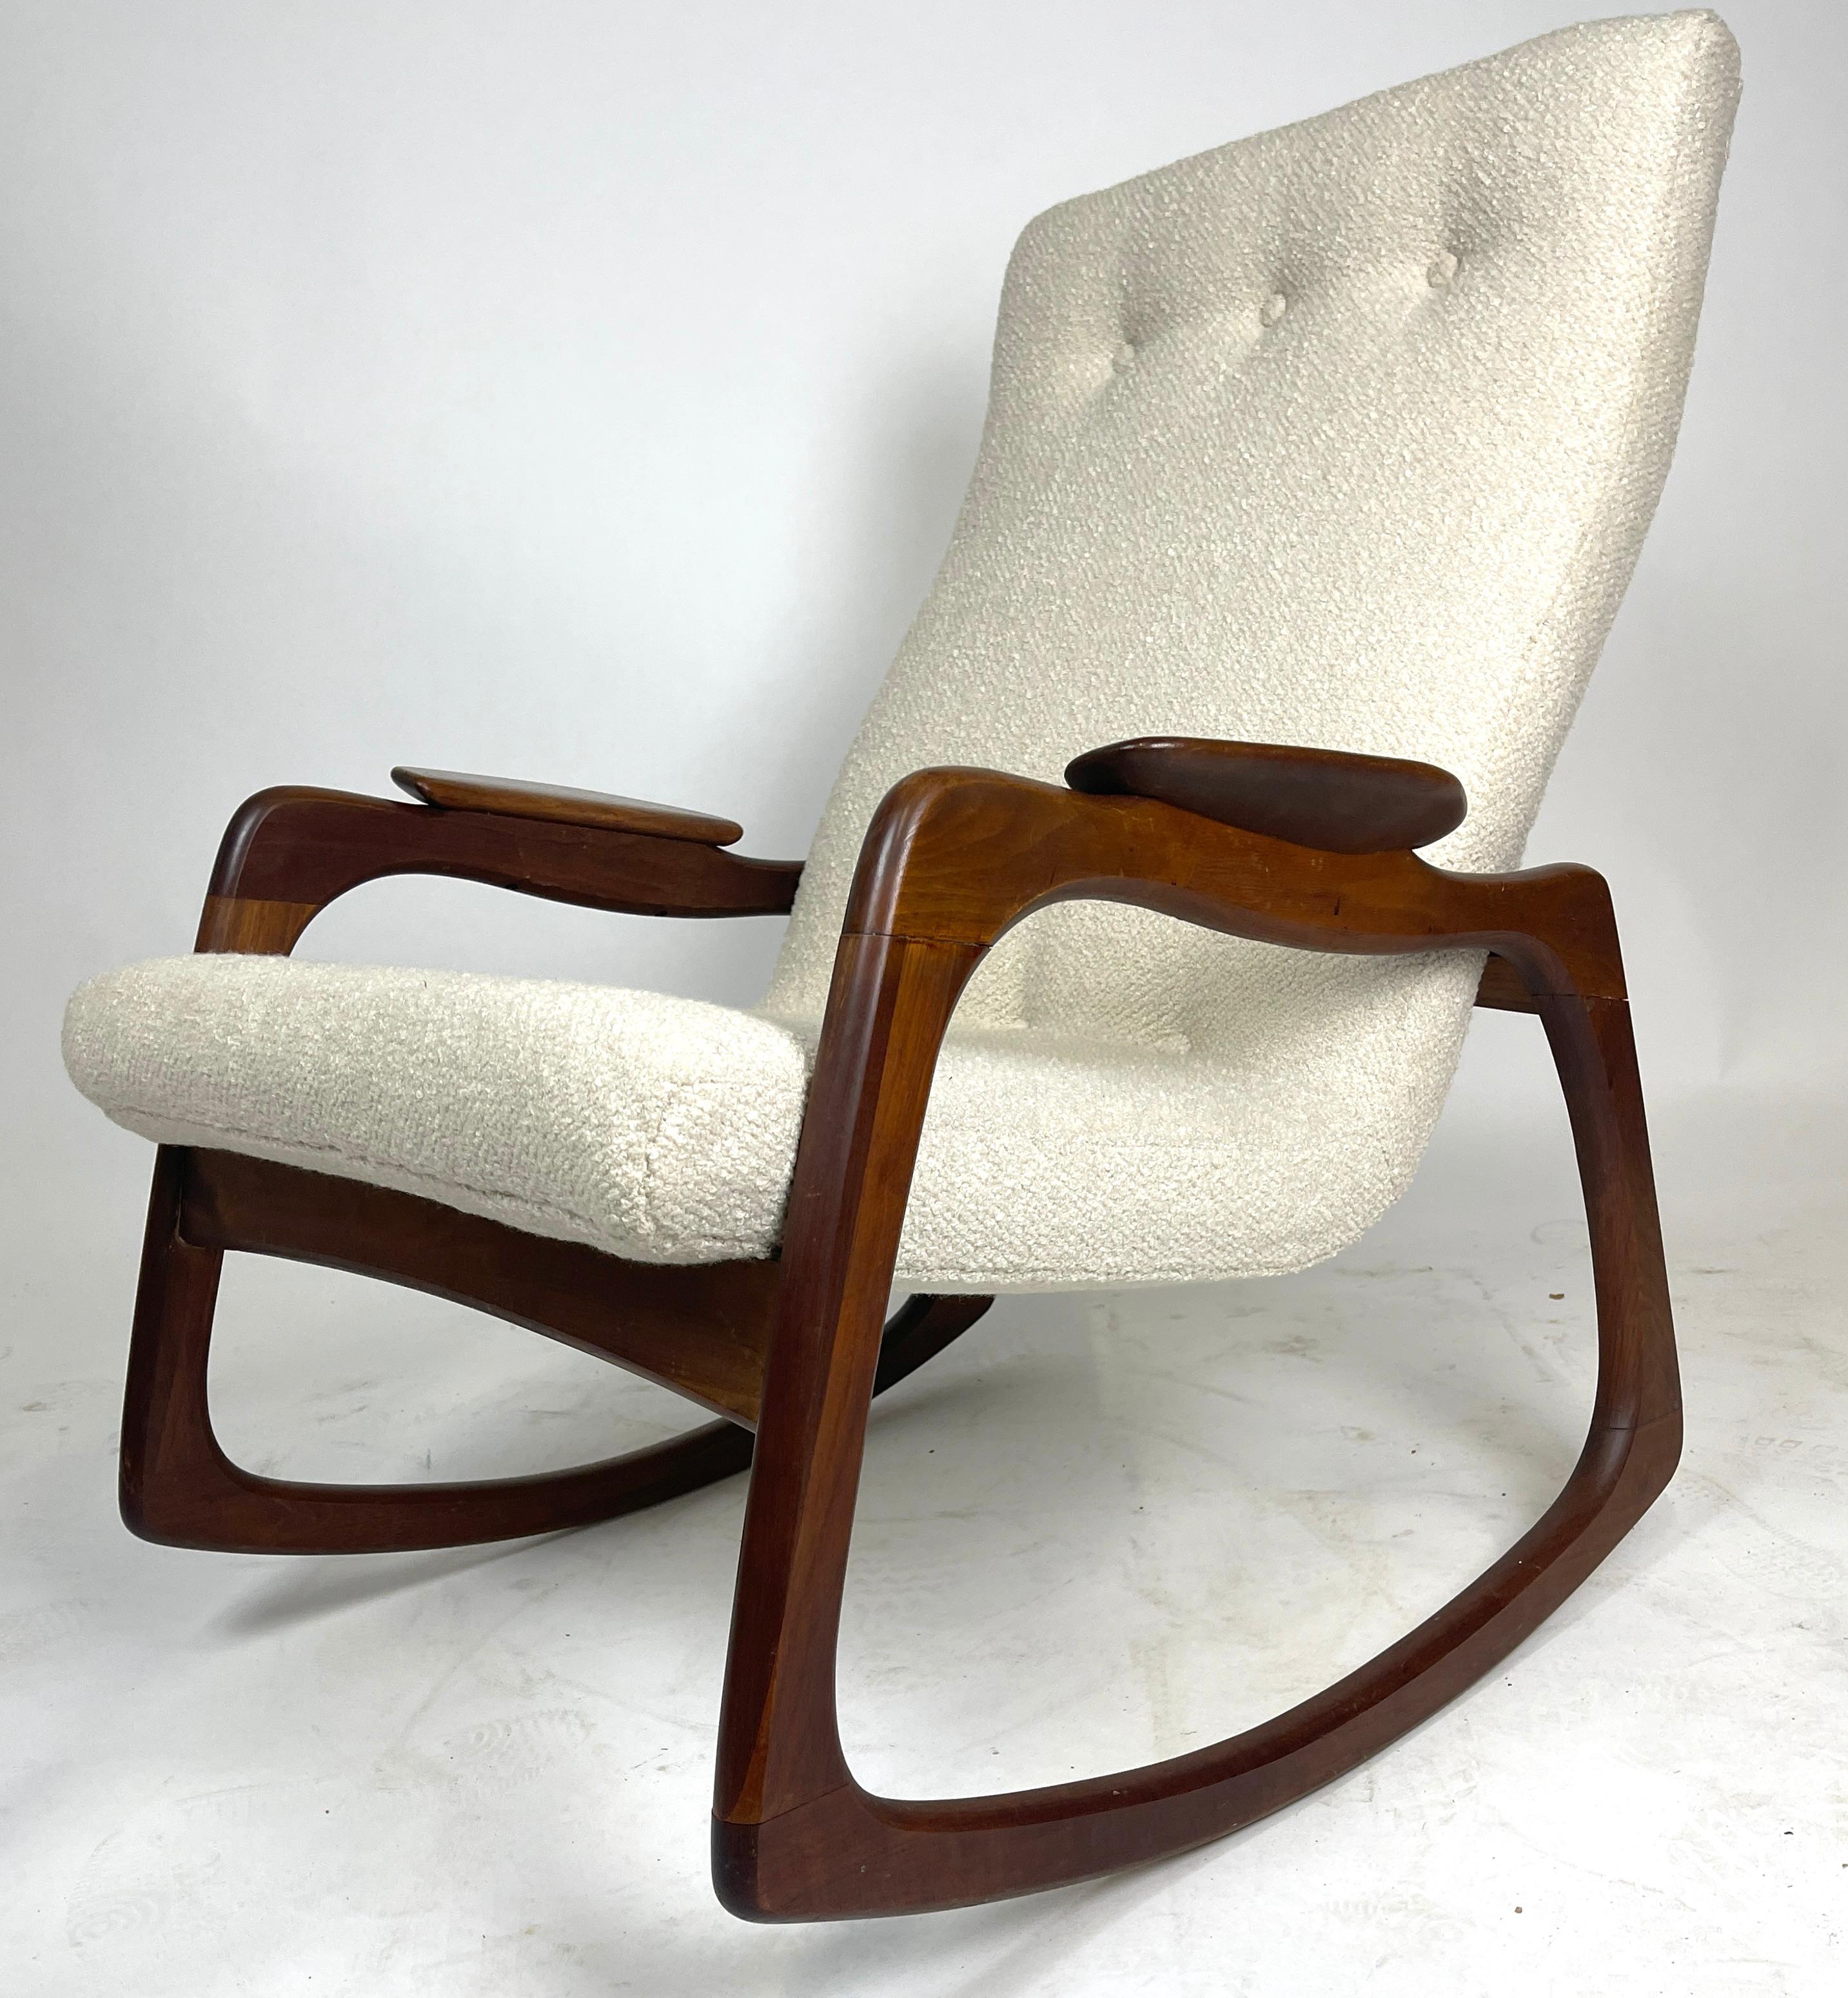 Freshly upholstered rocker designed by Adrian Pearsall for Craft Associates. Sculptural walnut frame with a brand new nubby fabric.